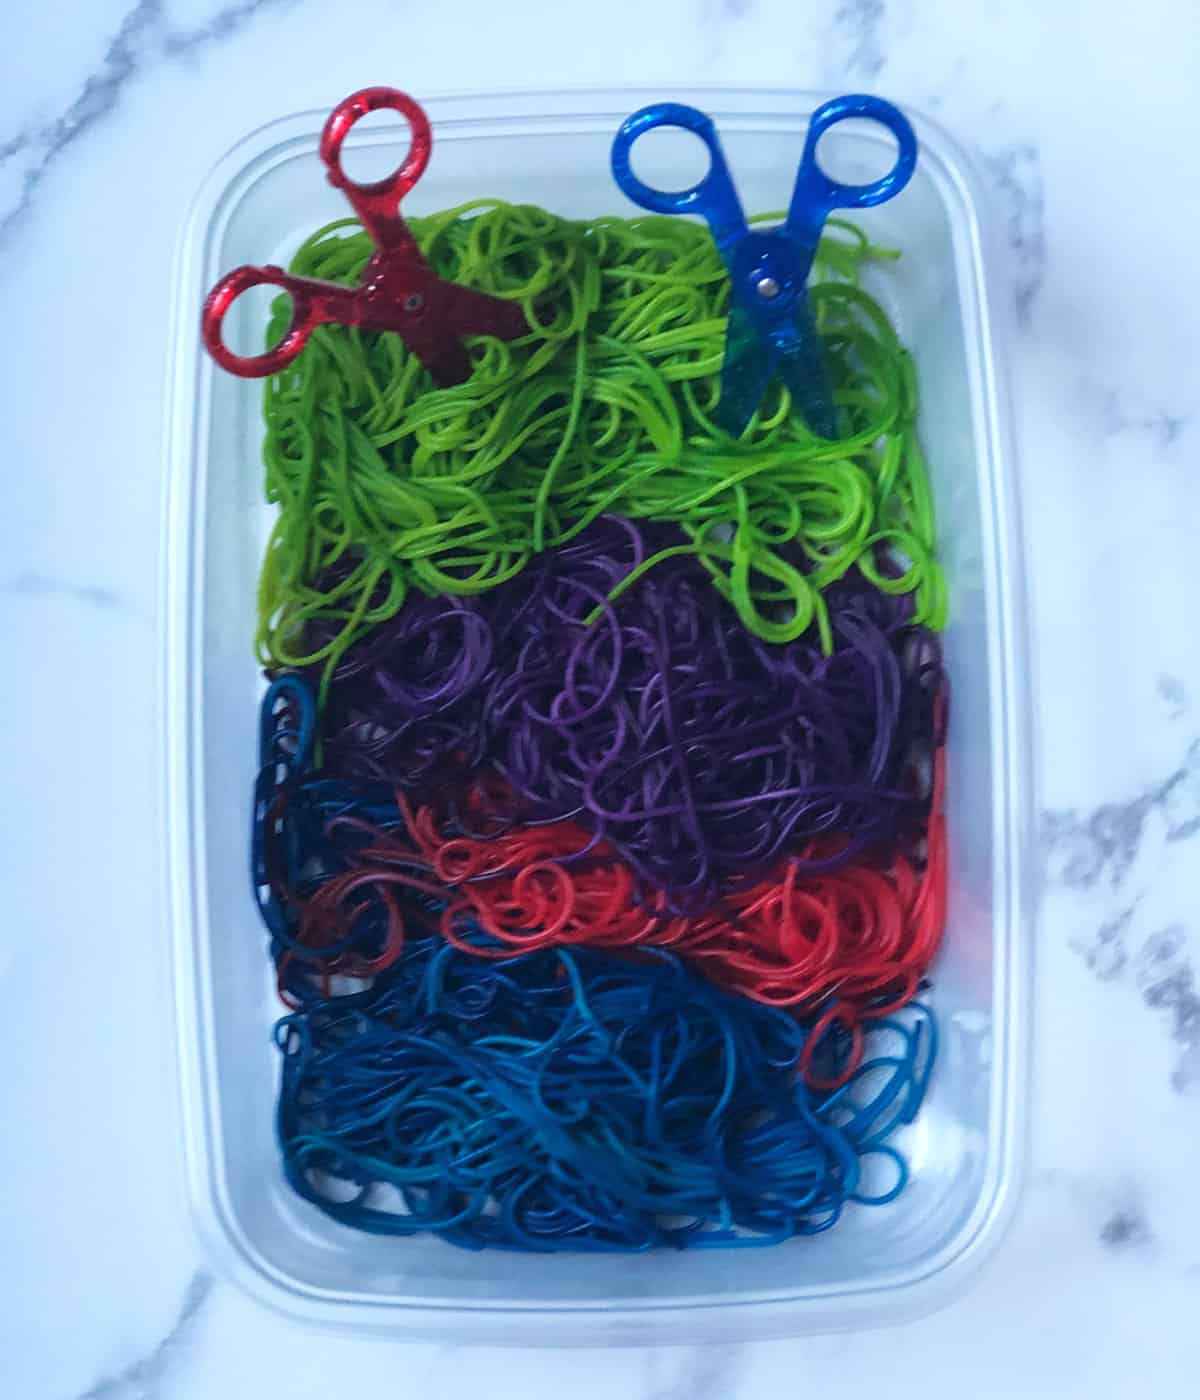 Spaghetti noodles that have been dyed green, purple, pink, and blue in a sensory bin with two pairs of safety scissors